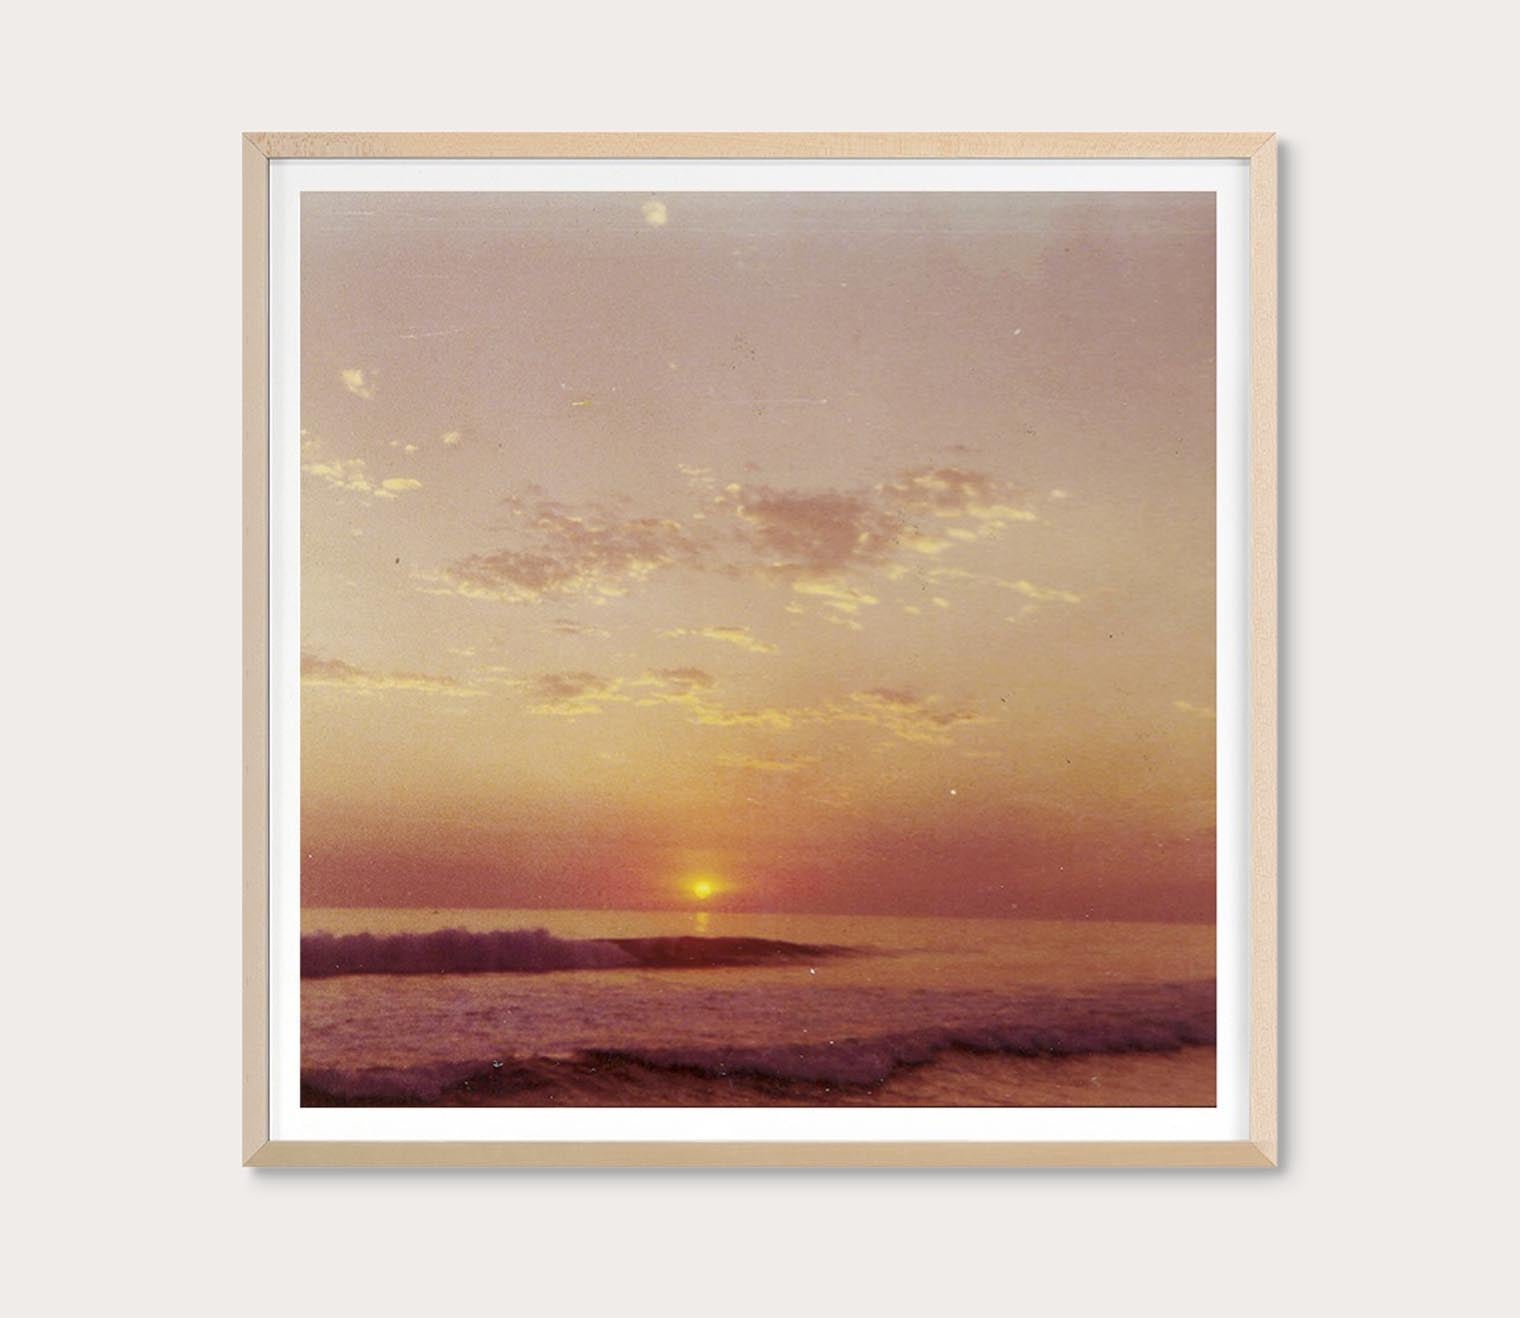 Sunset Digital Print by Grand Image Home